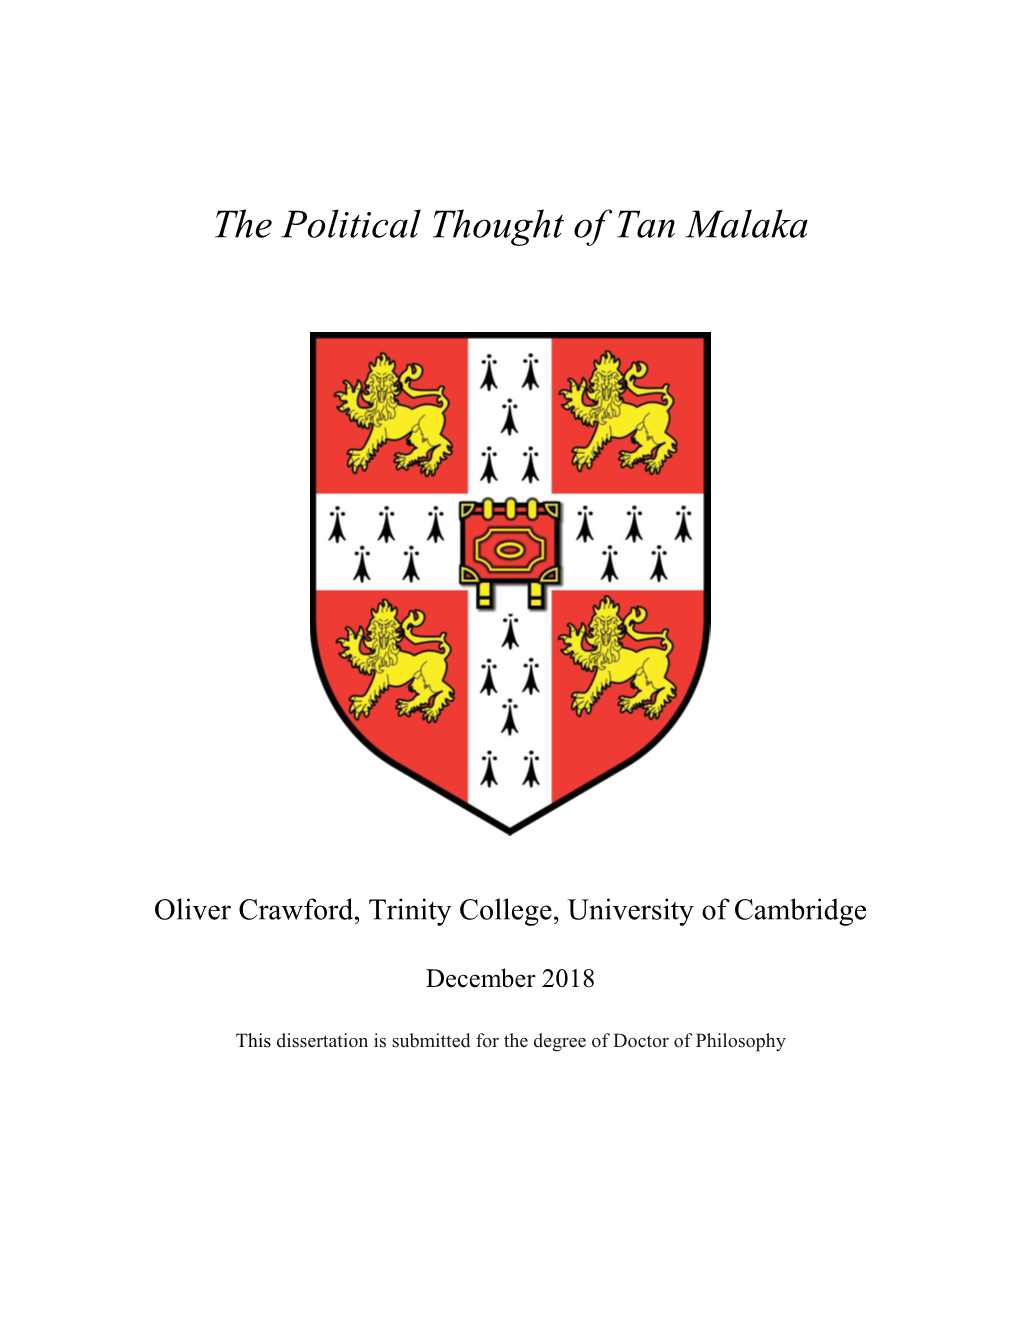 The Political Thought of Tan Malaka